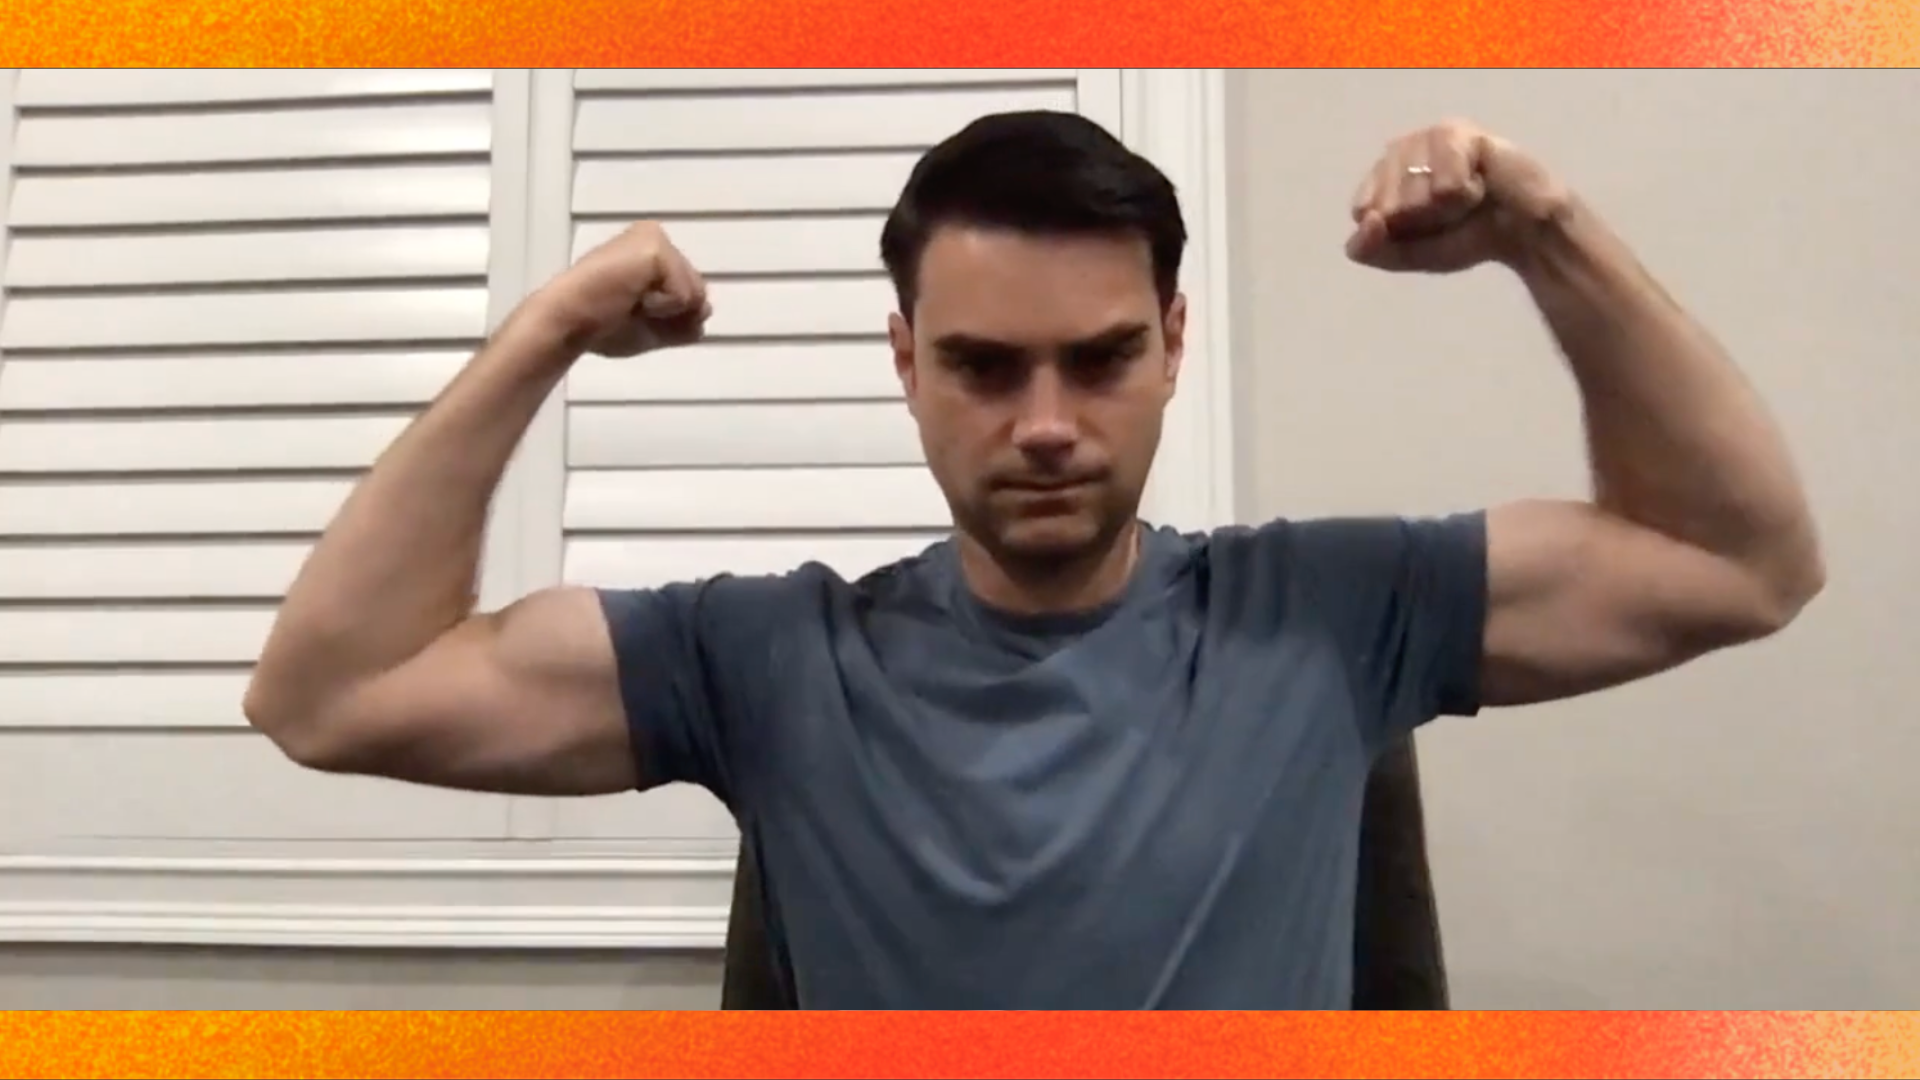 Ep. 471 - Welcome to the gun show, Ben's got fun and games! 